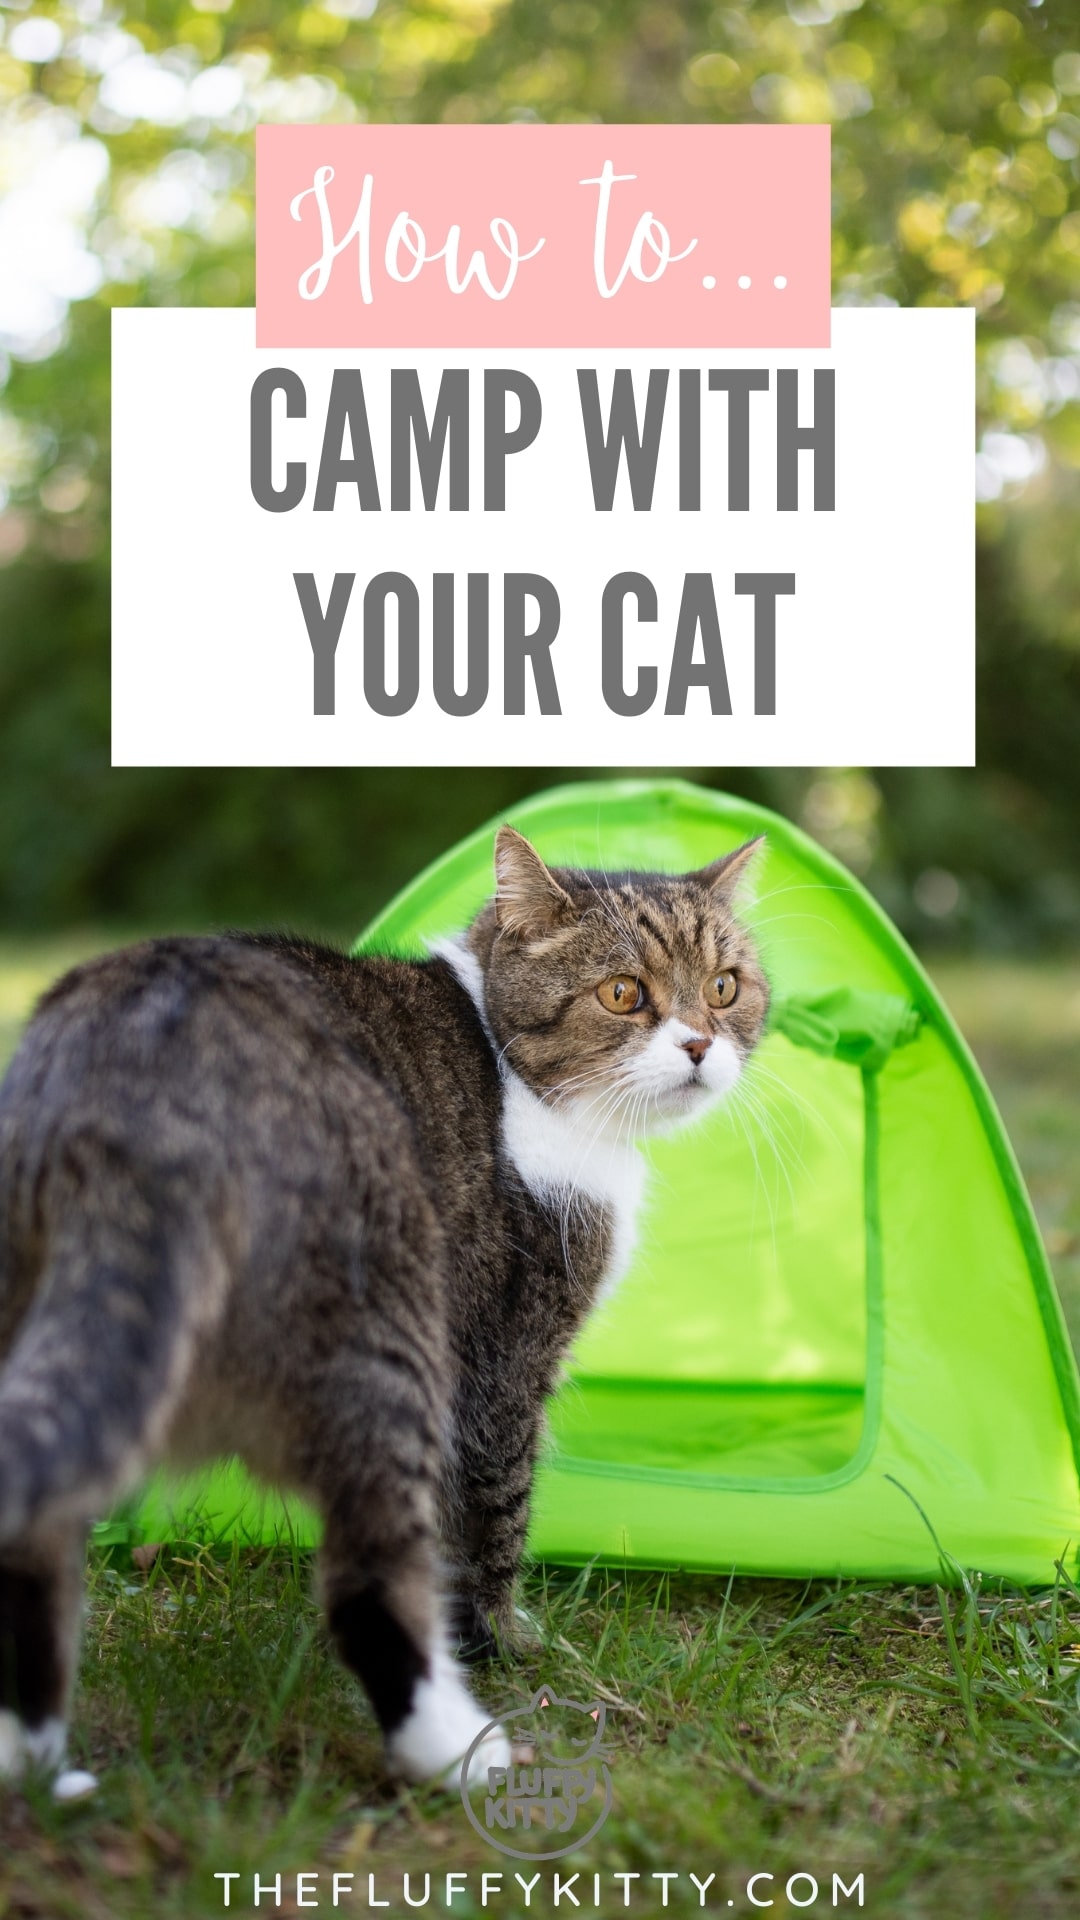 cat goes camping in a small cat tent, photo with text overlay "how to camp with your cat"